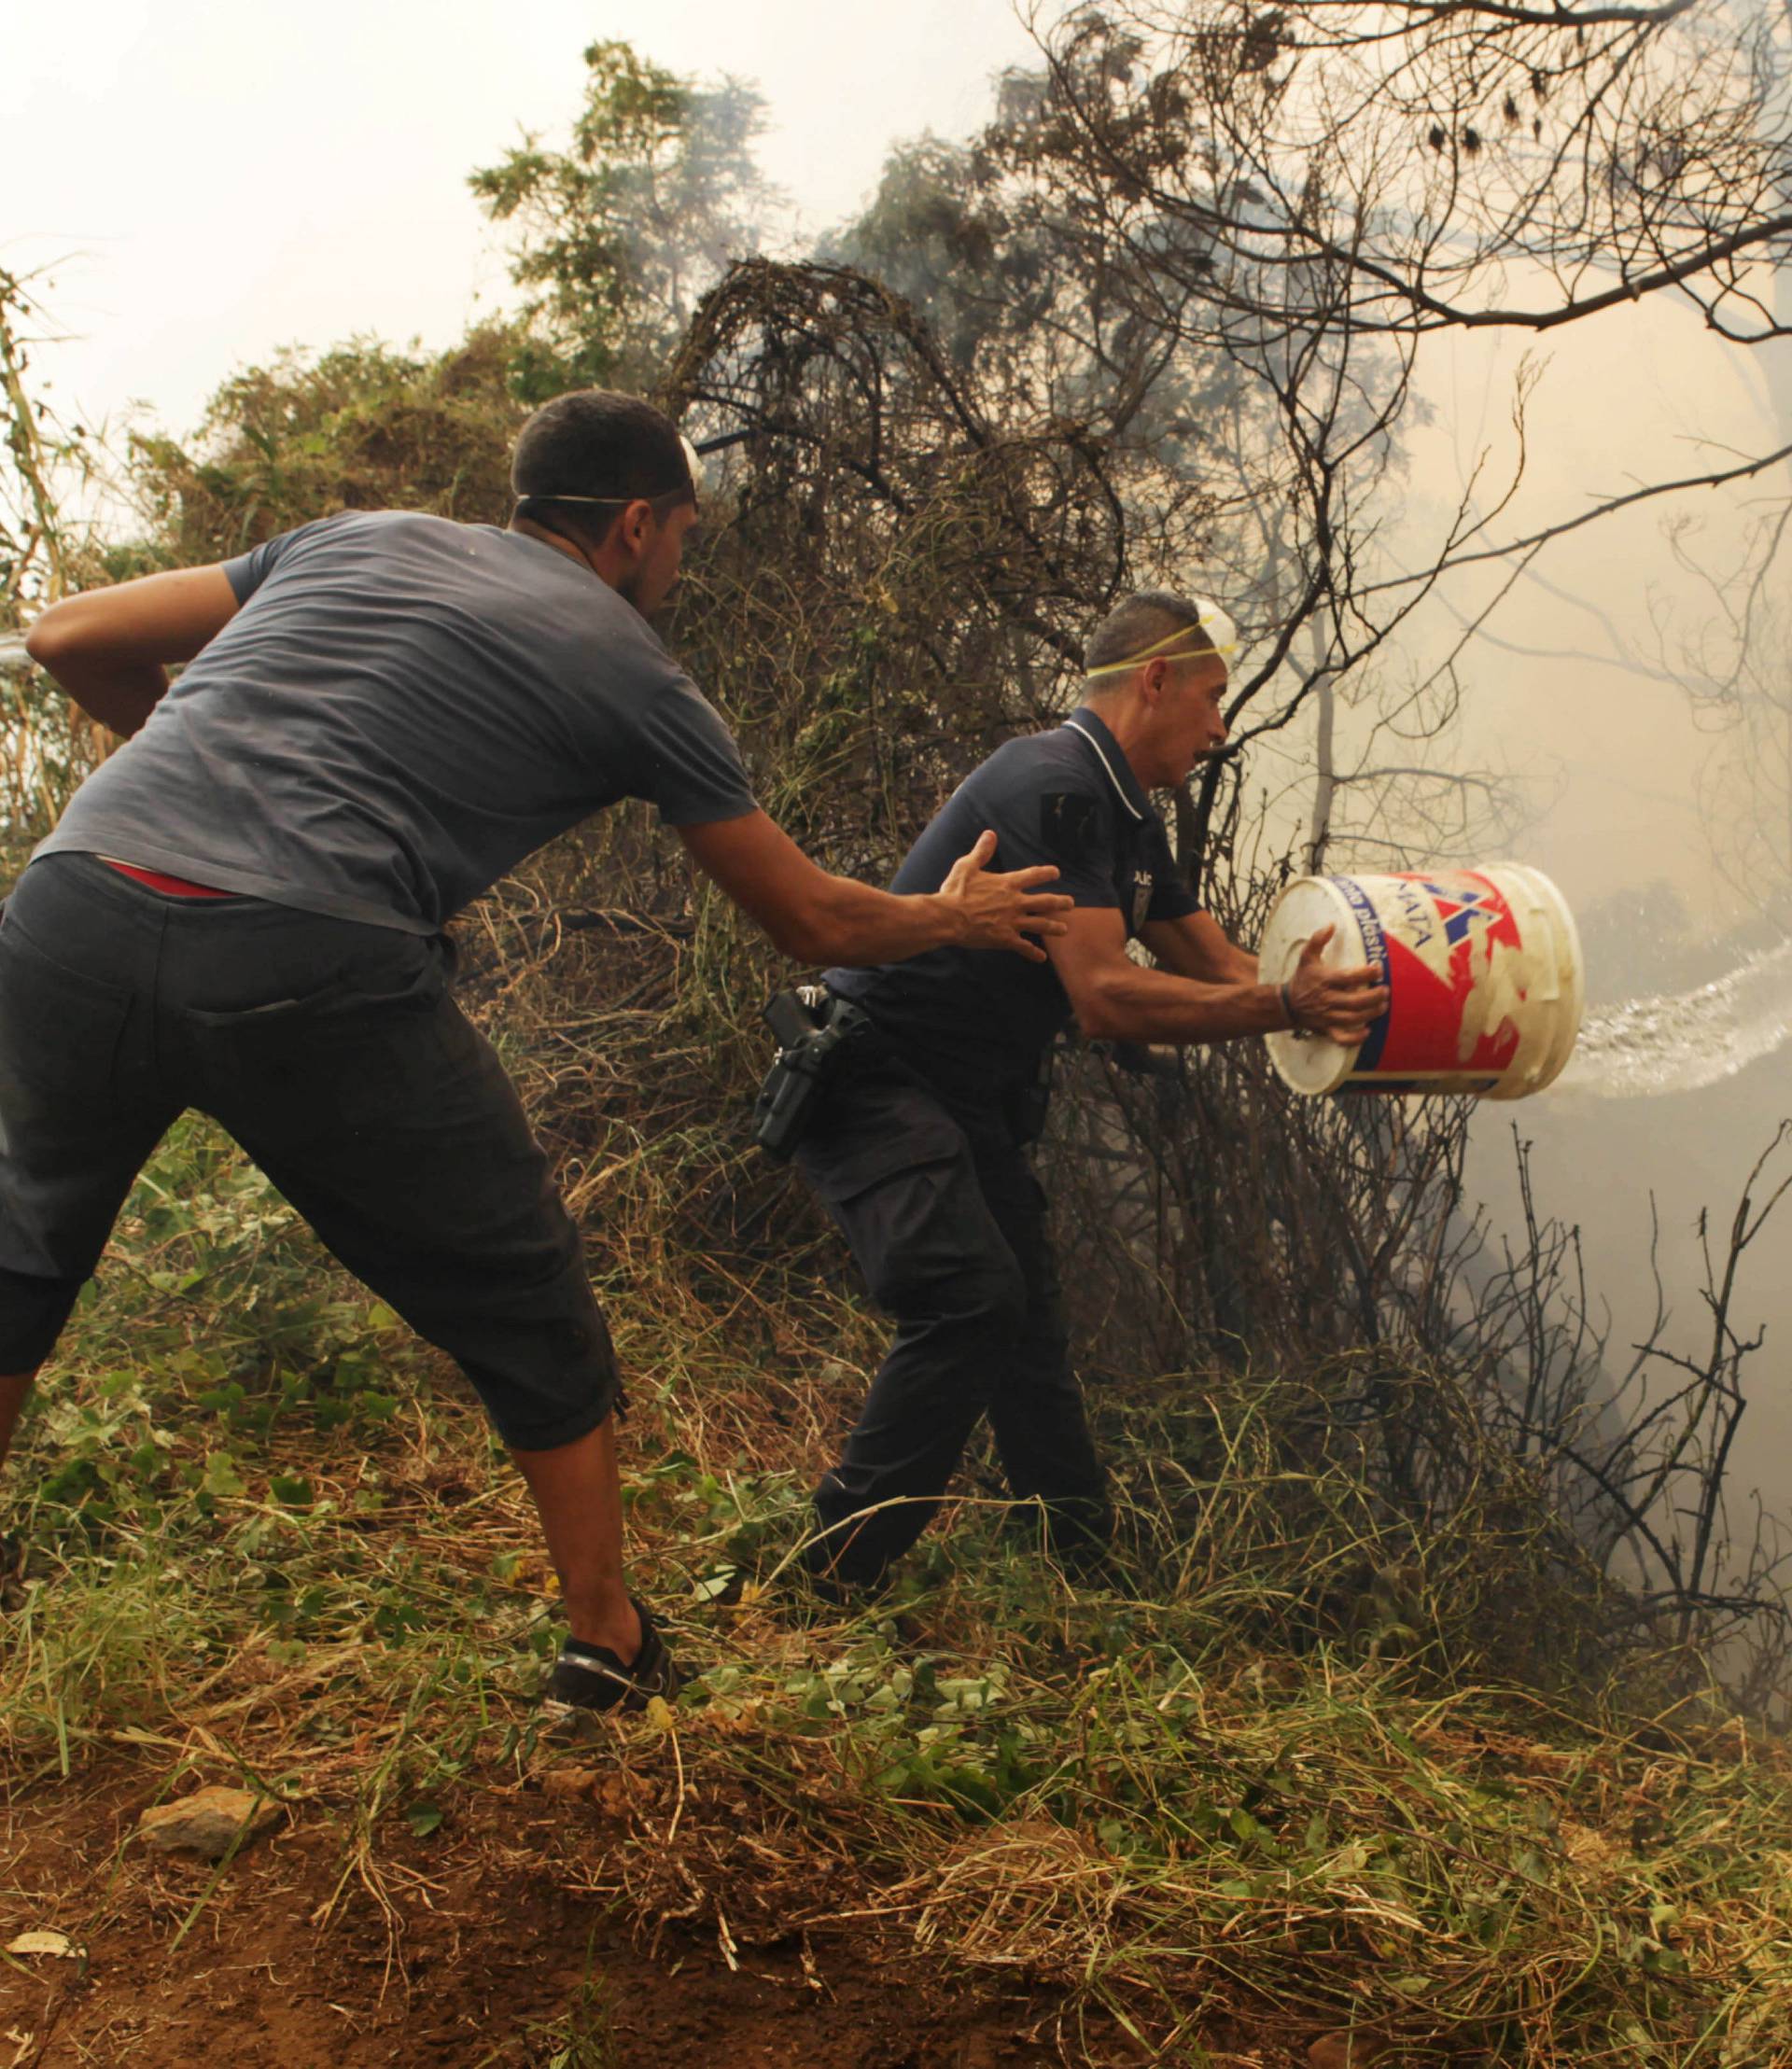 Civilians, and police officers use water buckets to help extinguish a forest fire near houses at Sao Joao Latrao, Funchal, Madeira island